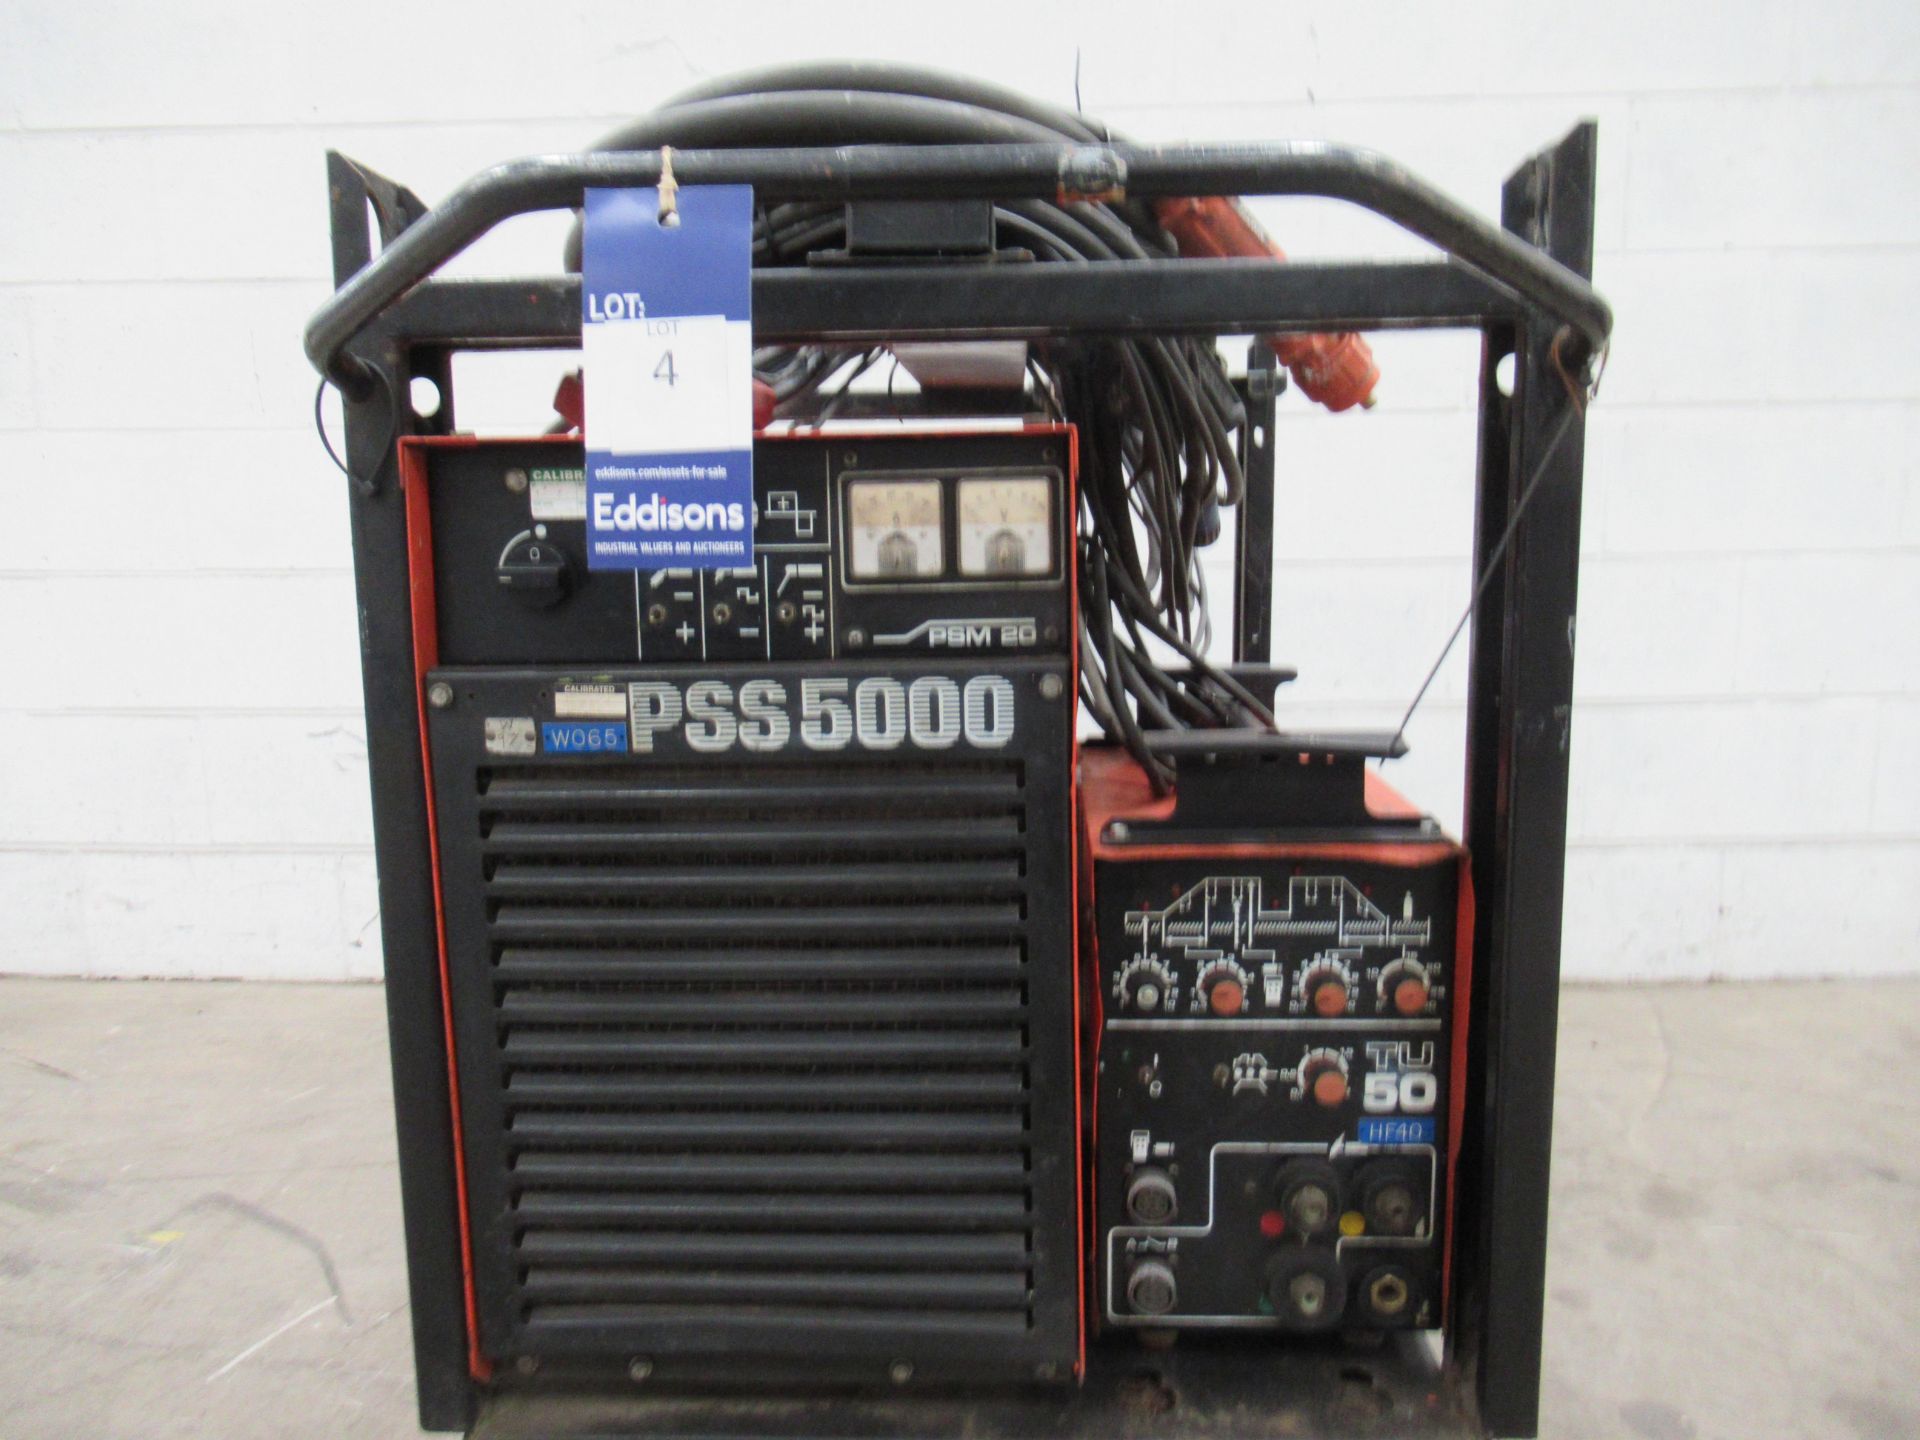 Kemppi PSS5000 welder and Kemppi TU50 controller with torch and leads